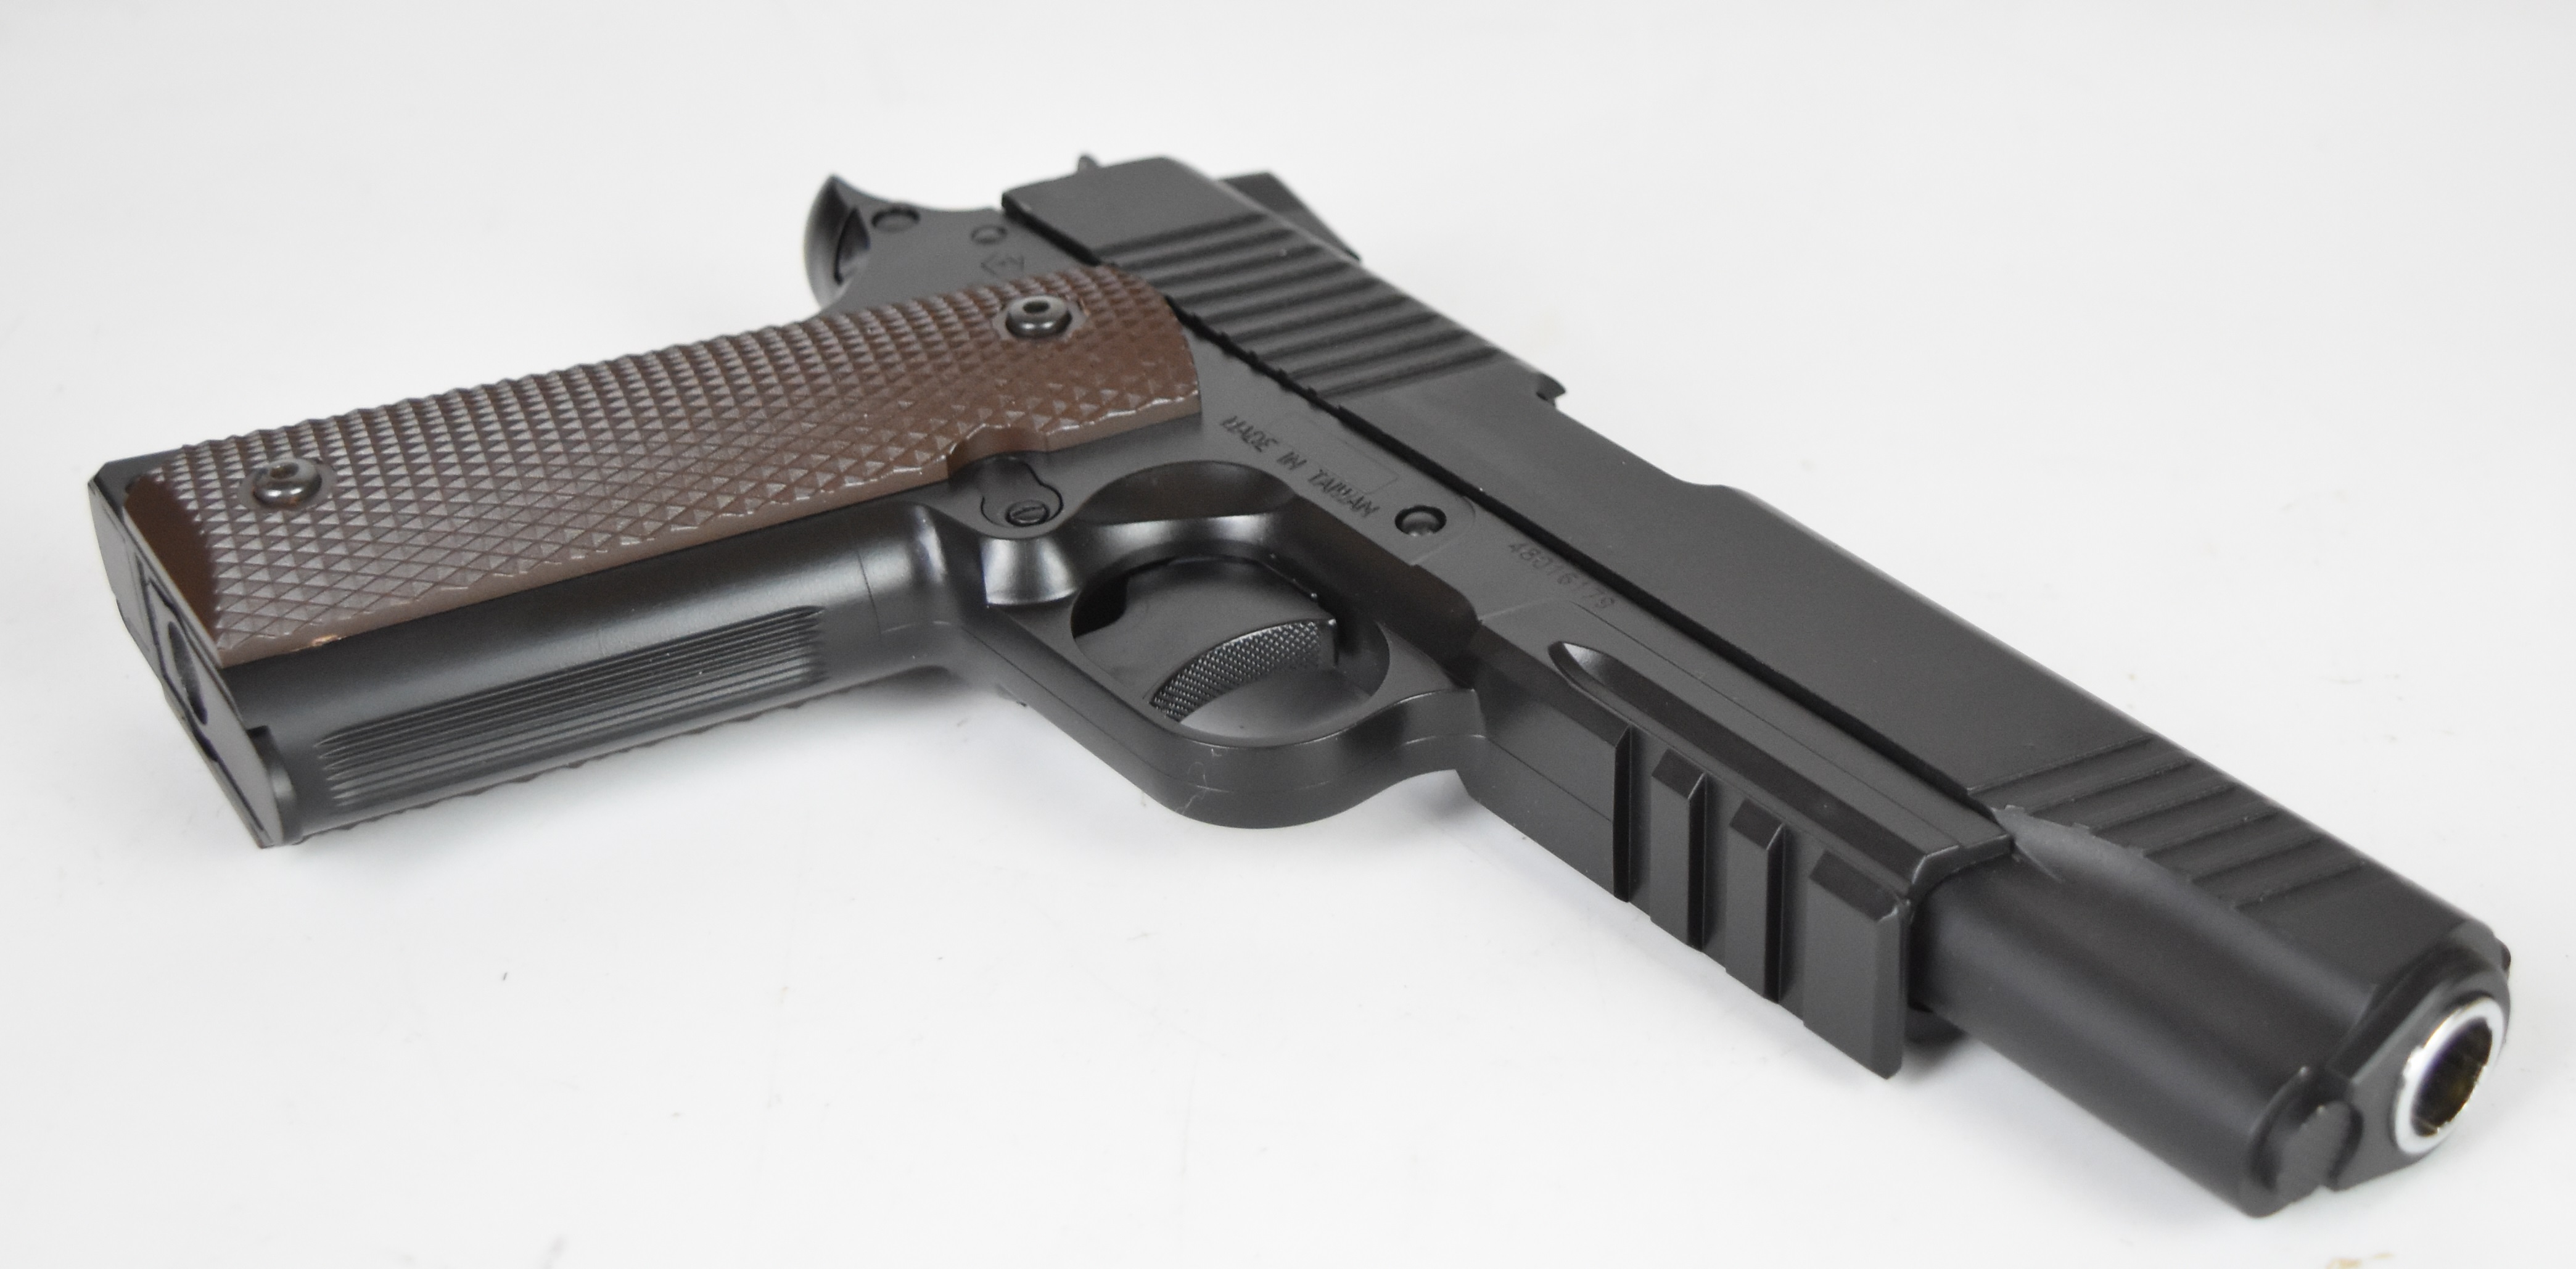 KWC M45 A1 .177 CO2 air pistol with chequered grips and 21 shot magazine, serial number 48016179, in - Image 5 of 12